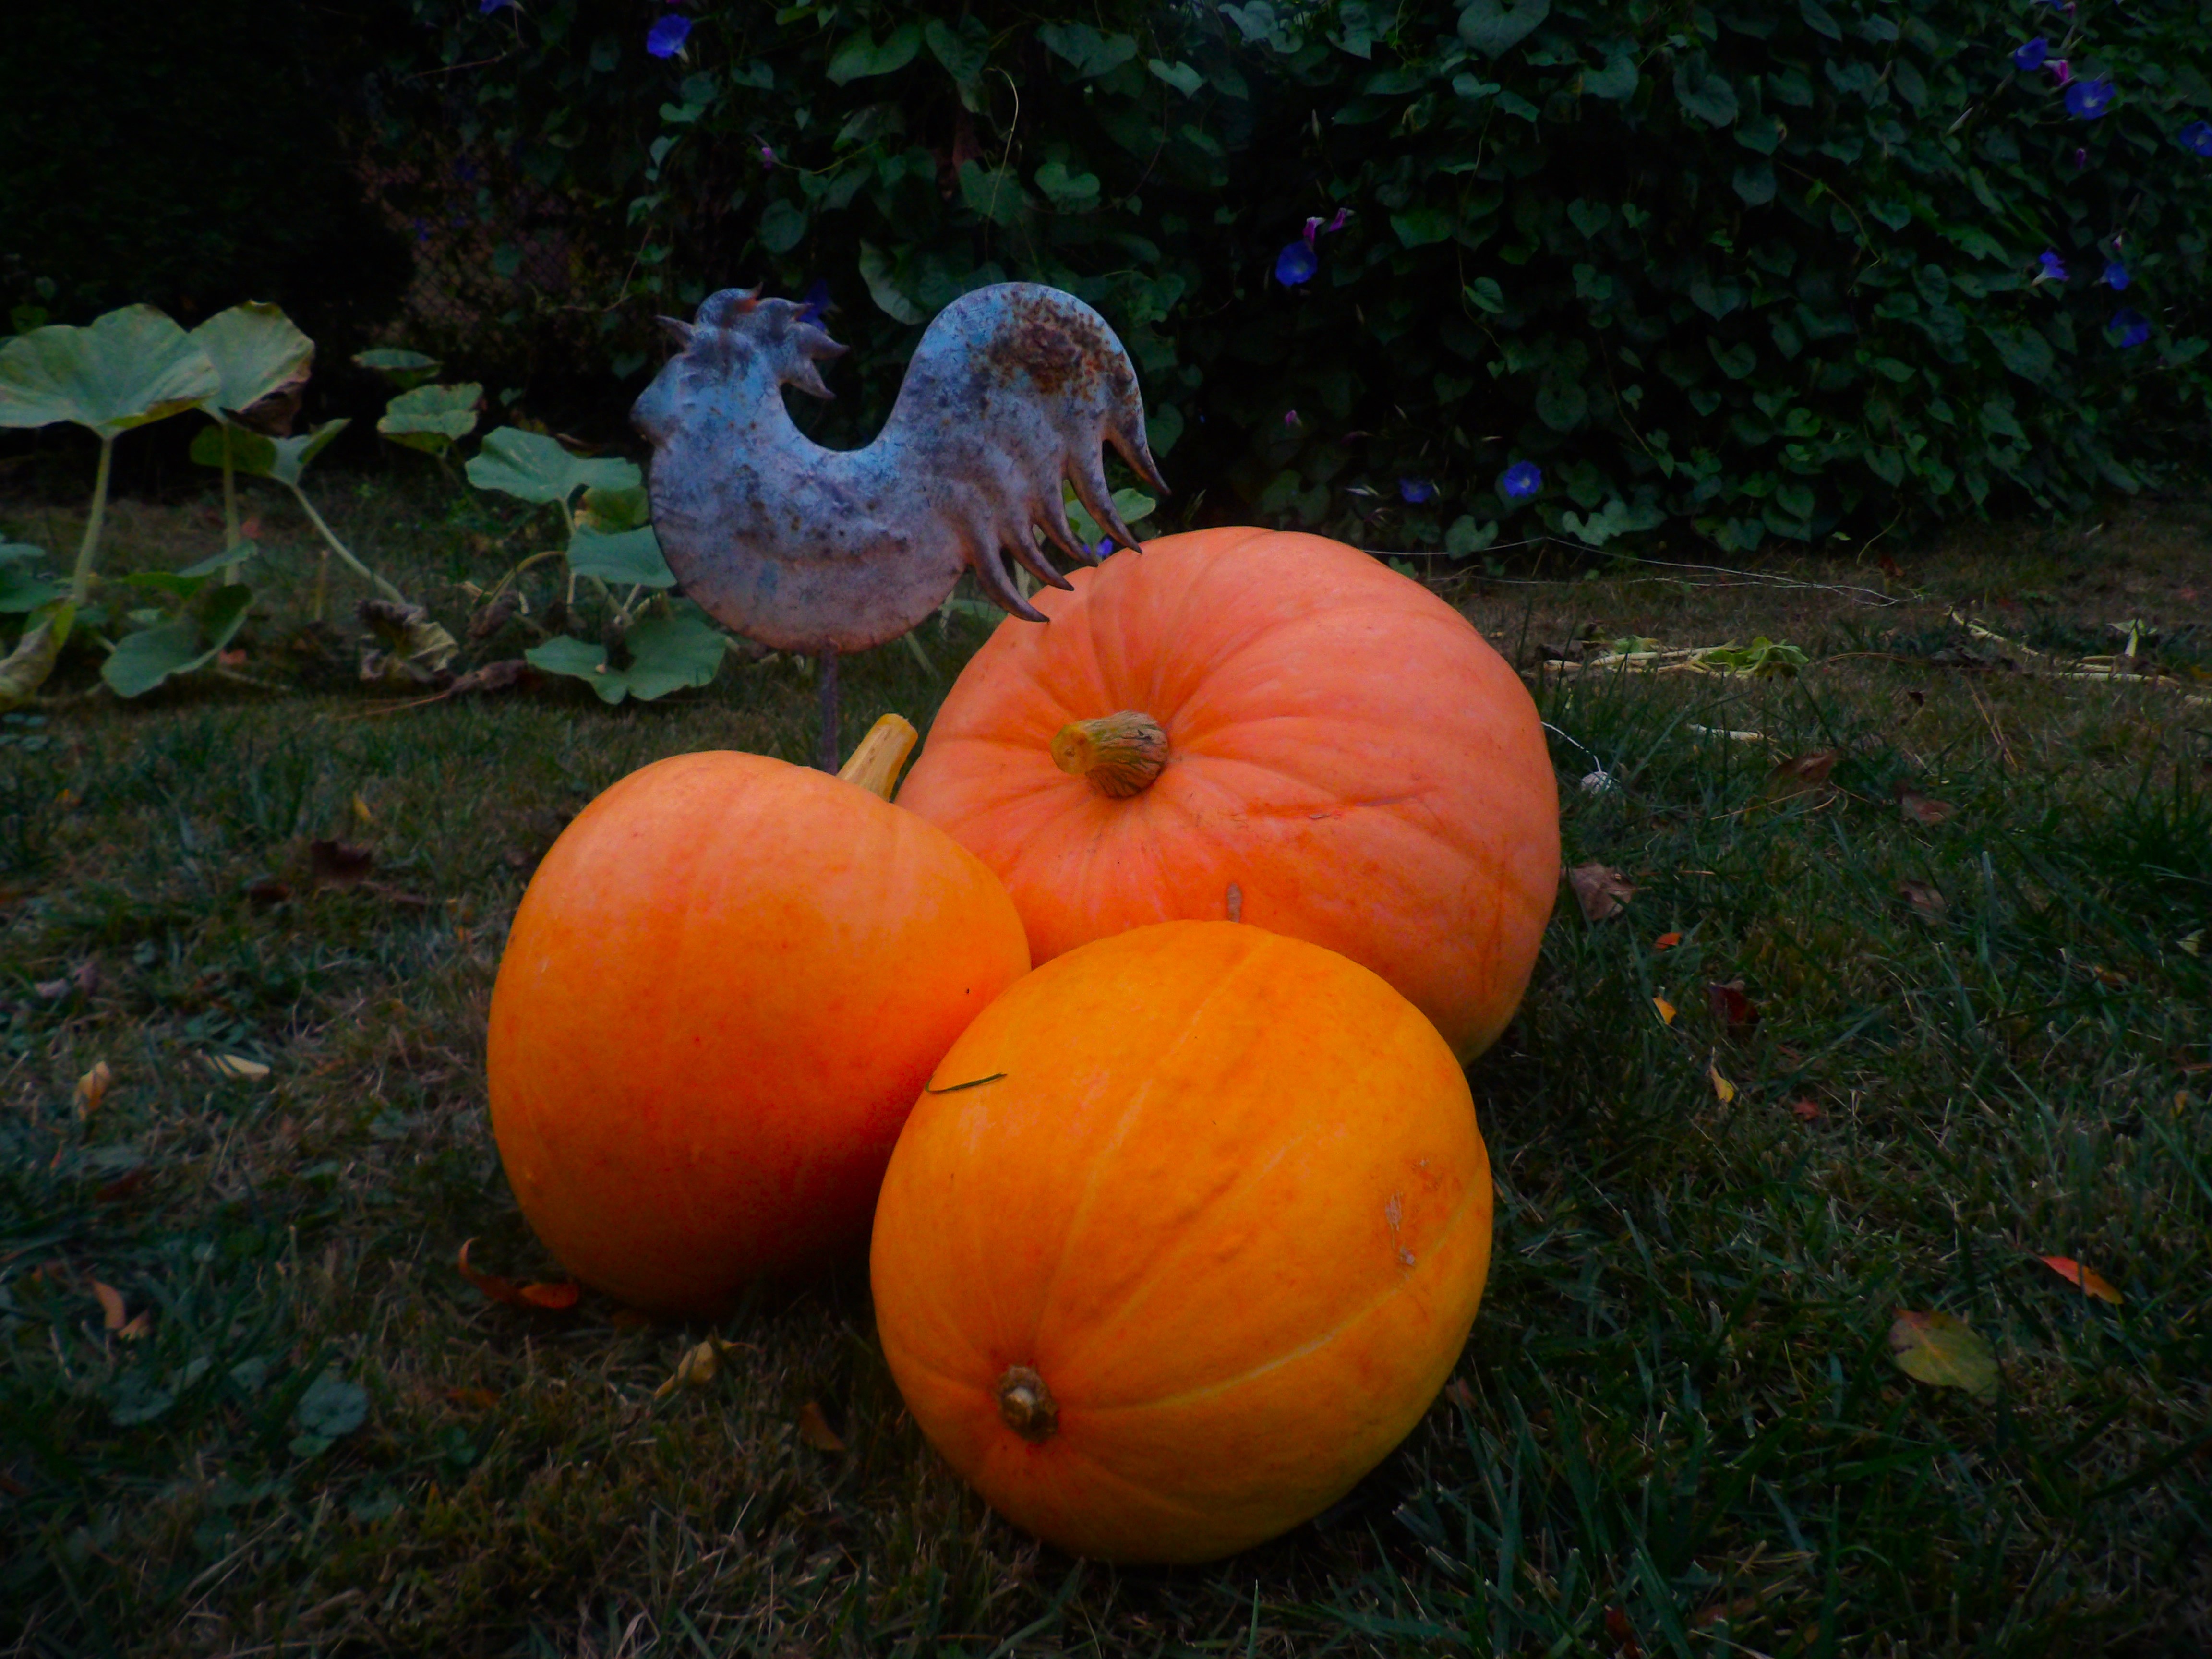 Three Orange Pumpkins and an ornamental chicken reminiscent of a weather Vane